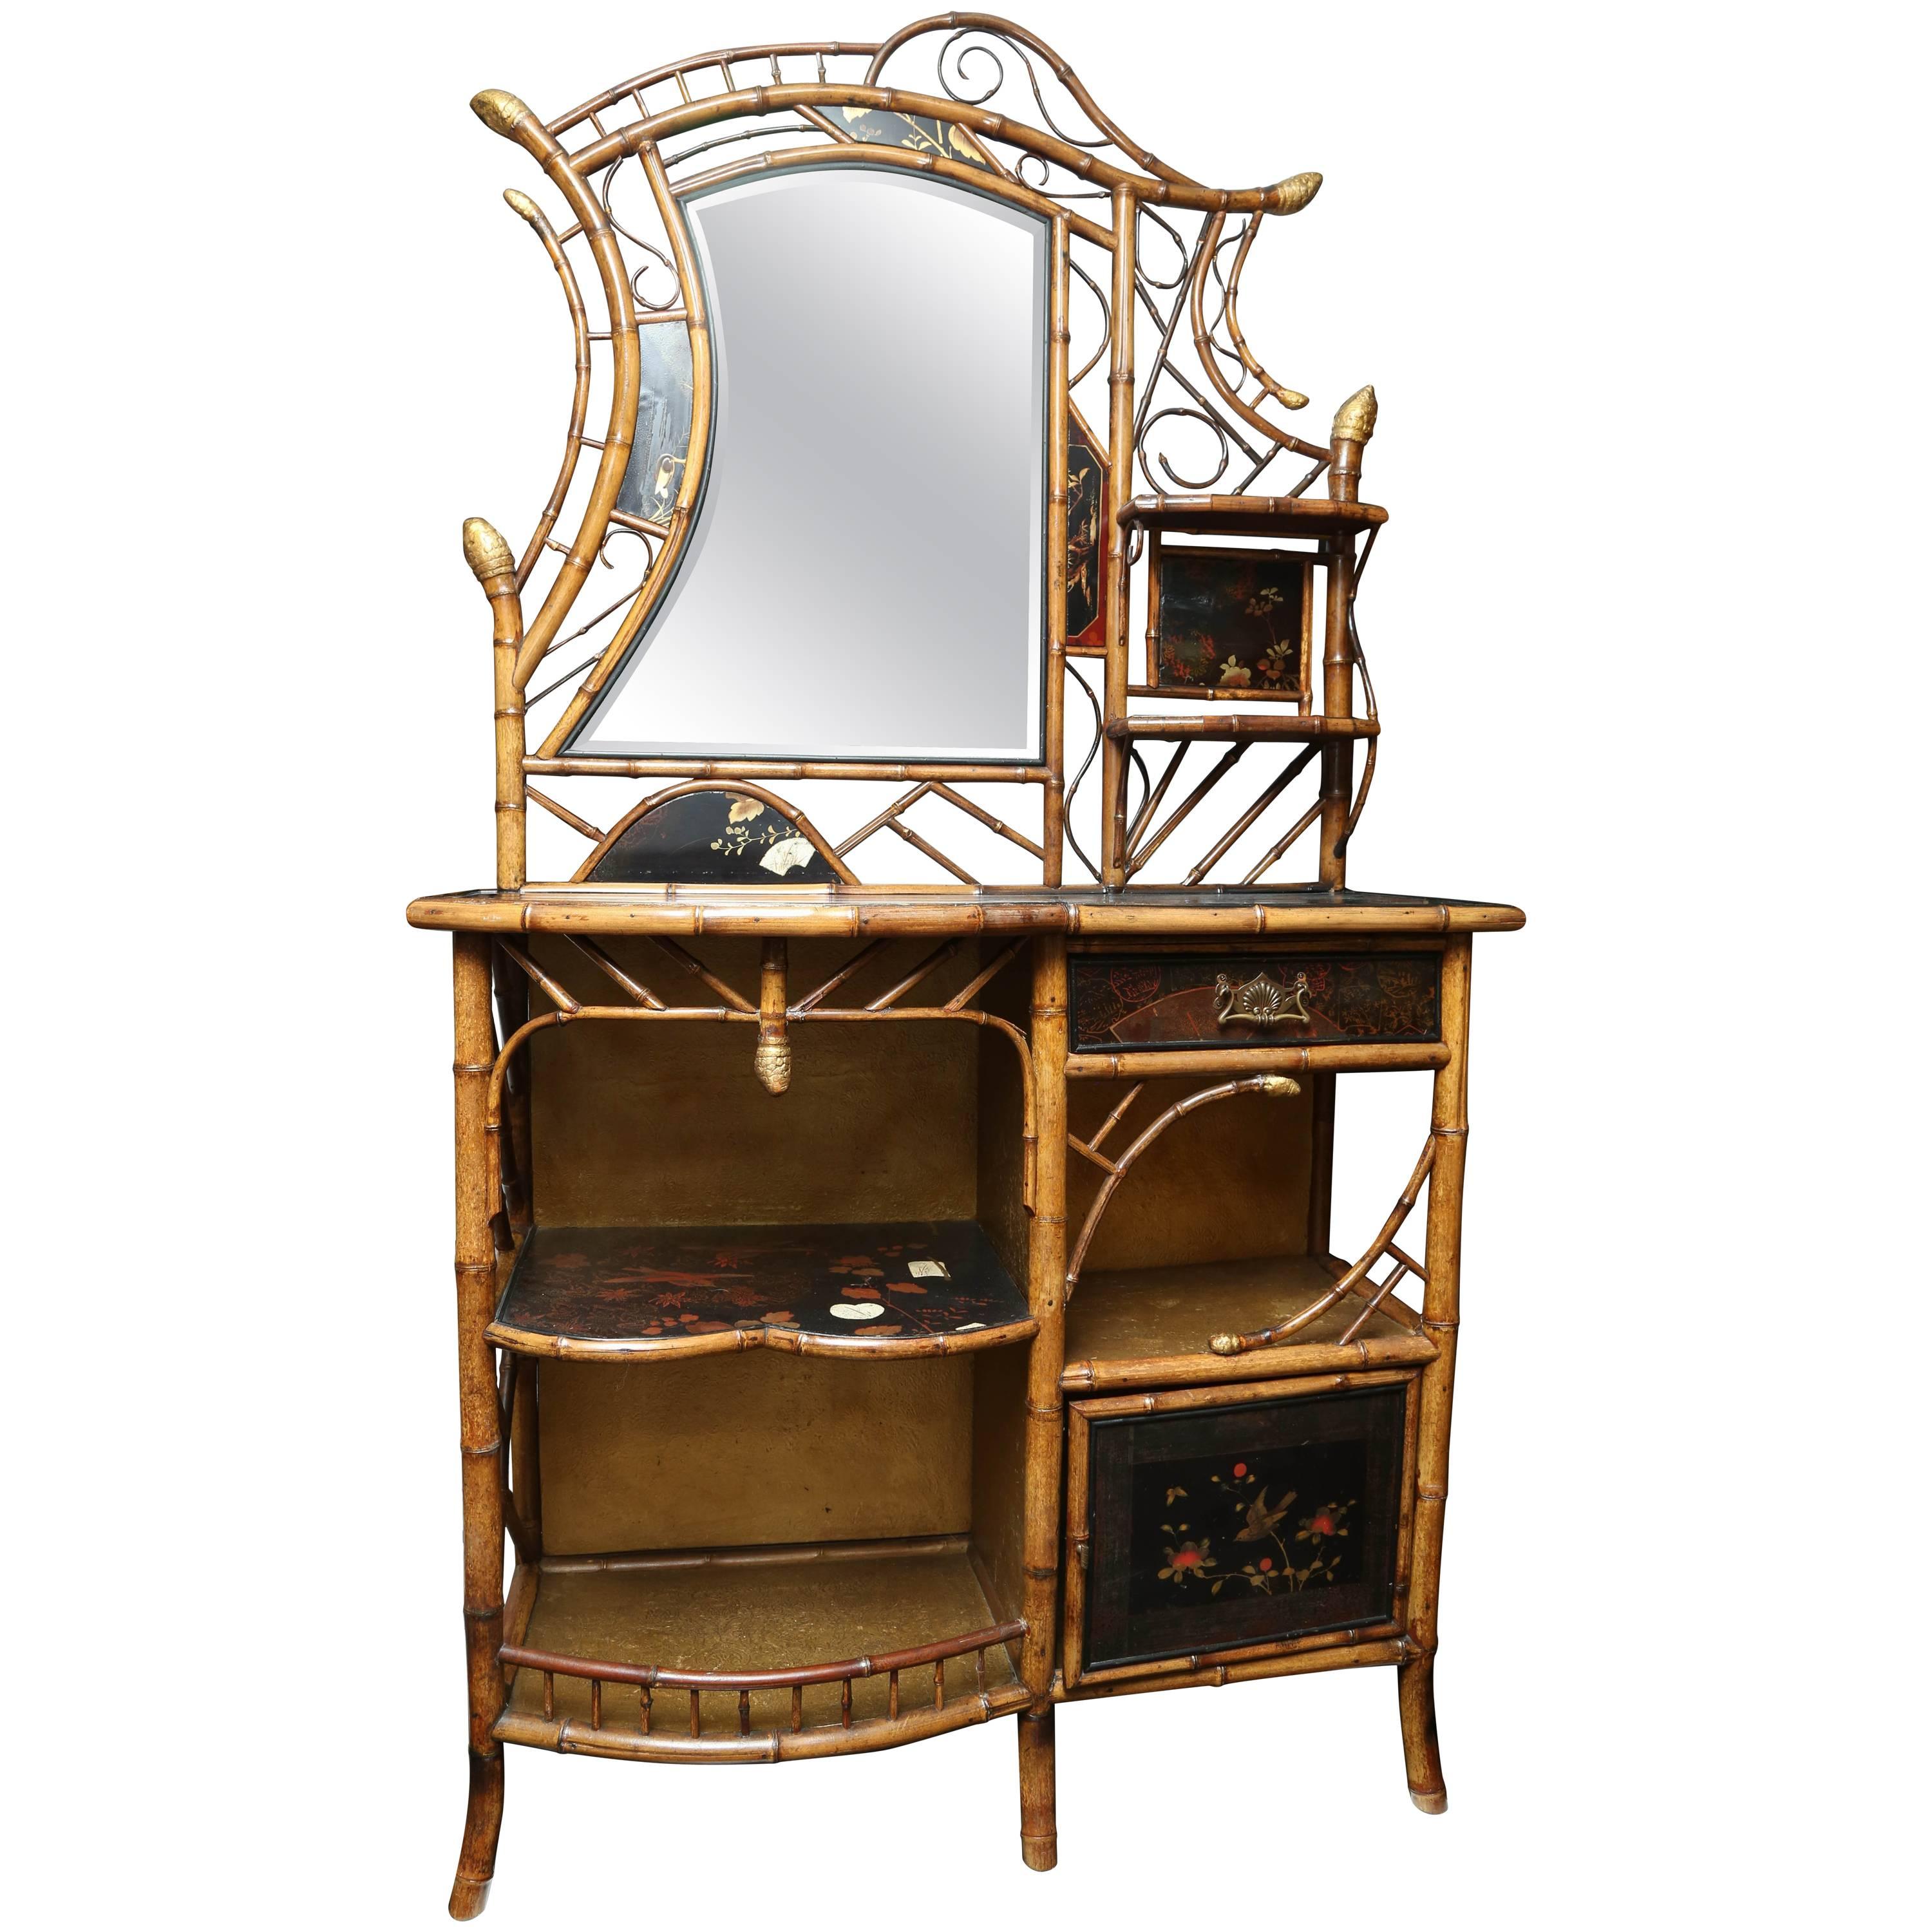 "Over the Top" 19th Century Bamboo Fantasy Sideboard